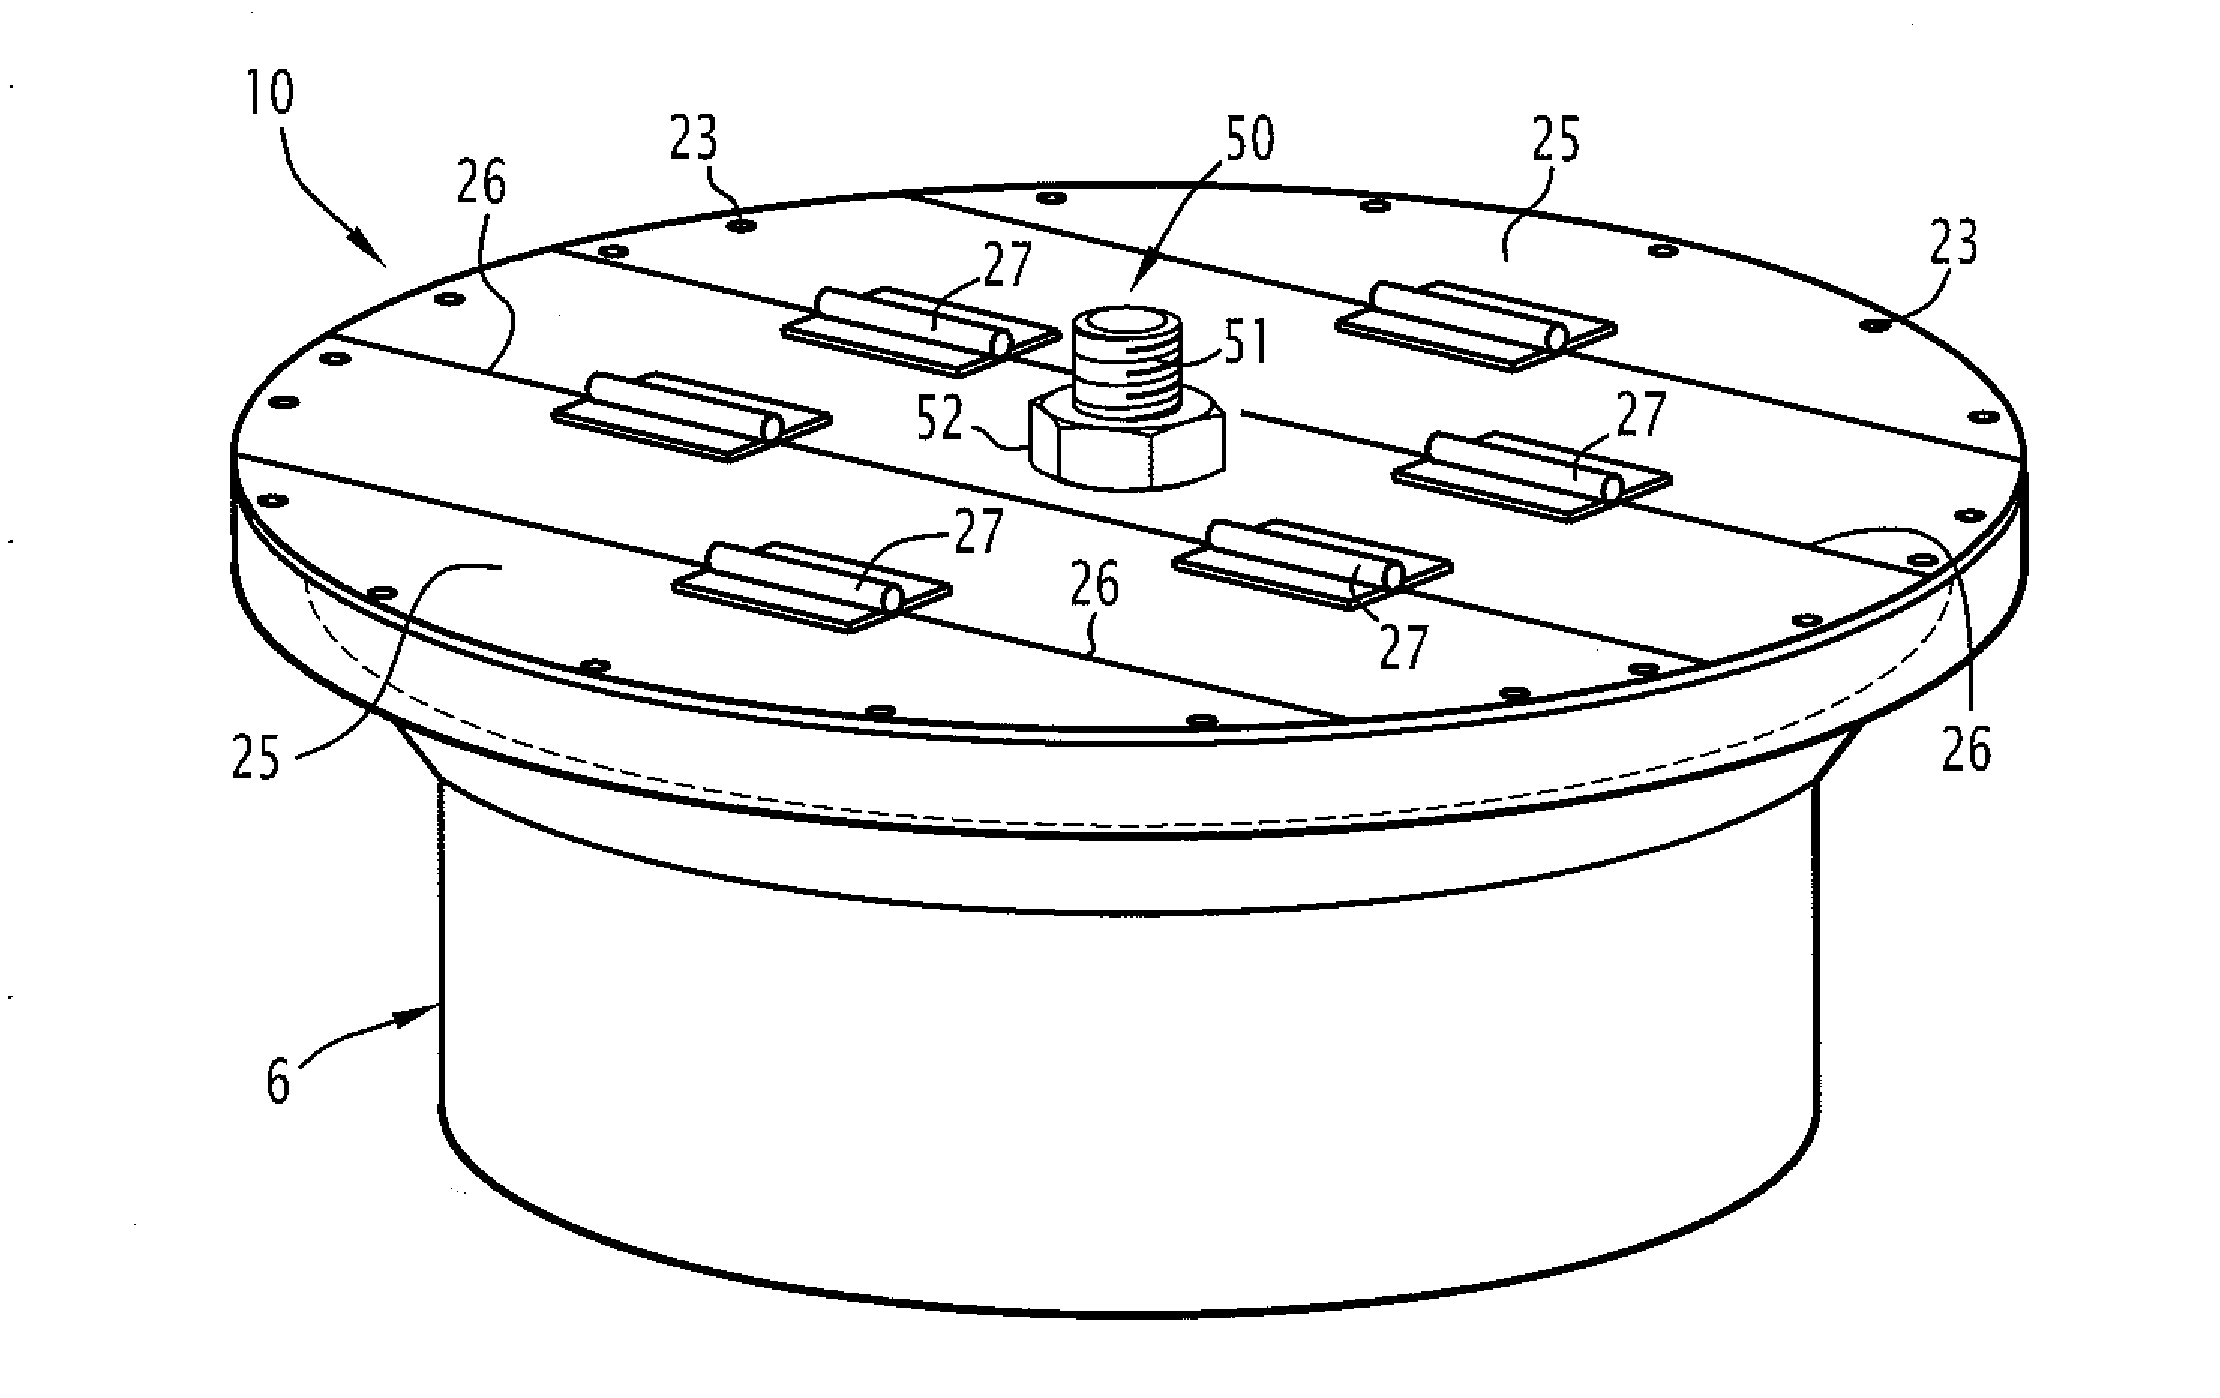 Sealed stopper for an opening in a tubing for joining a chamber and a piping, particularly in the steam generator of a nuclear pressurised water reactor